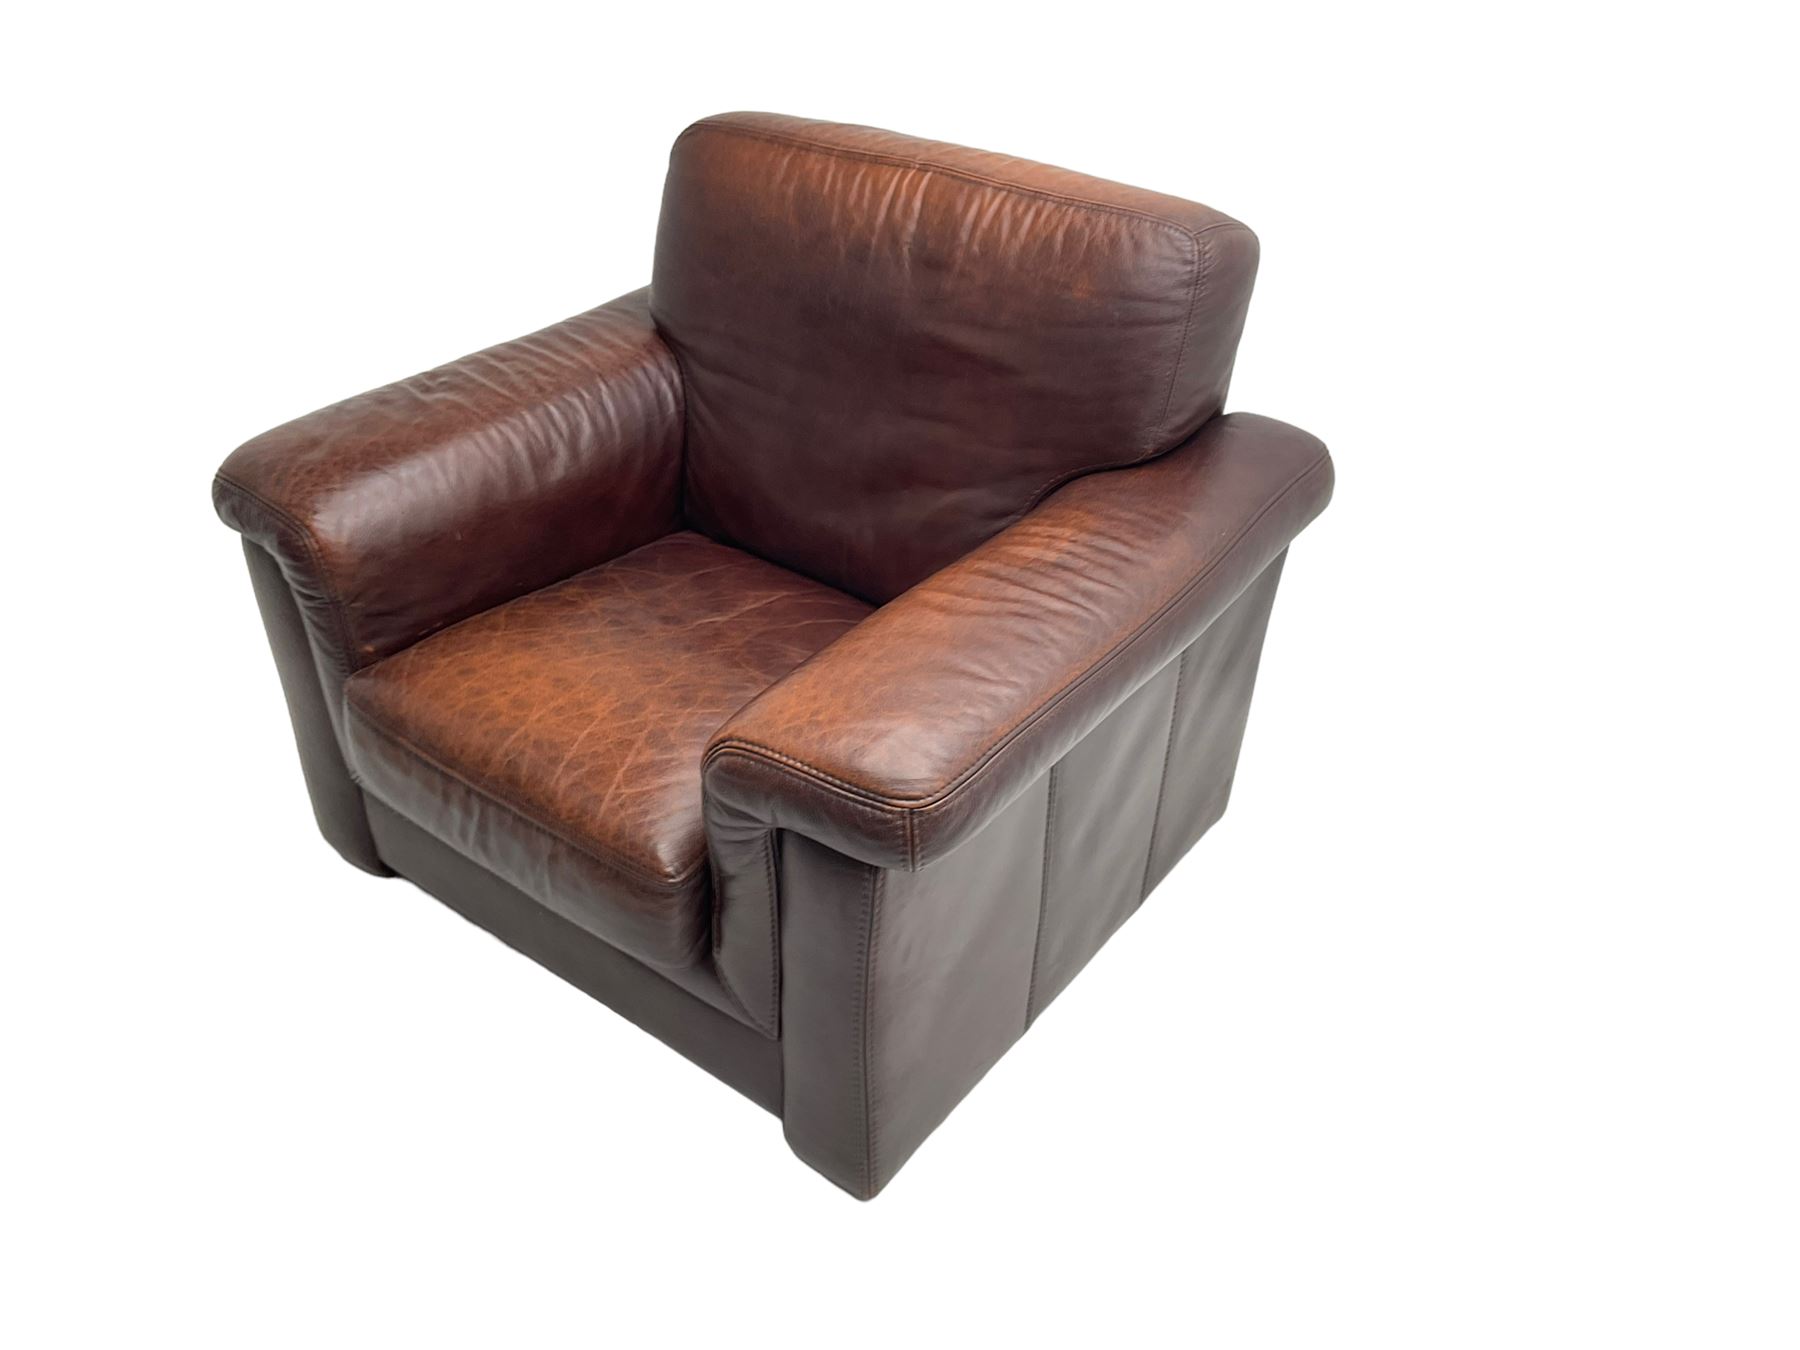 Large armchair upholstered in chocolate brown leather - Image 4 of 6